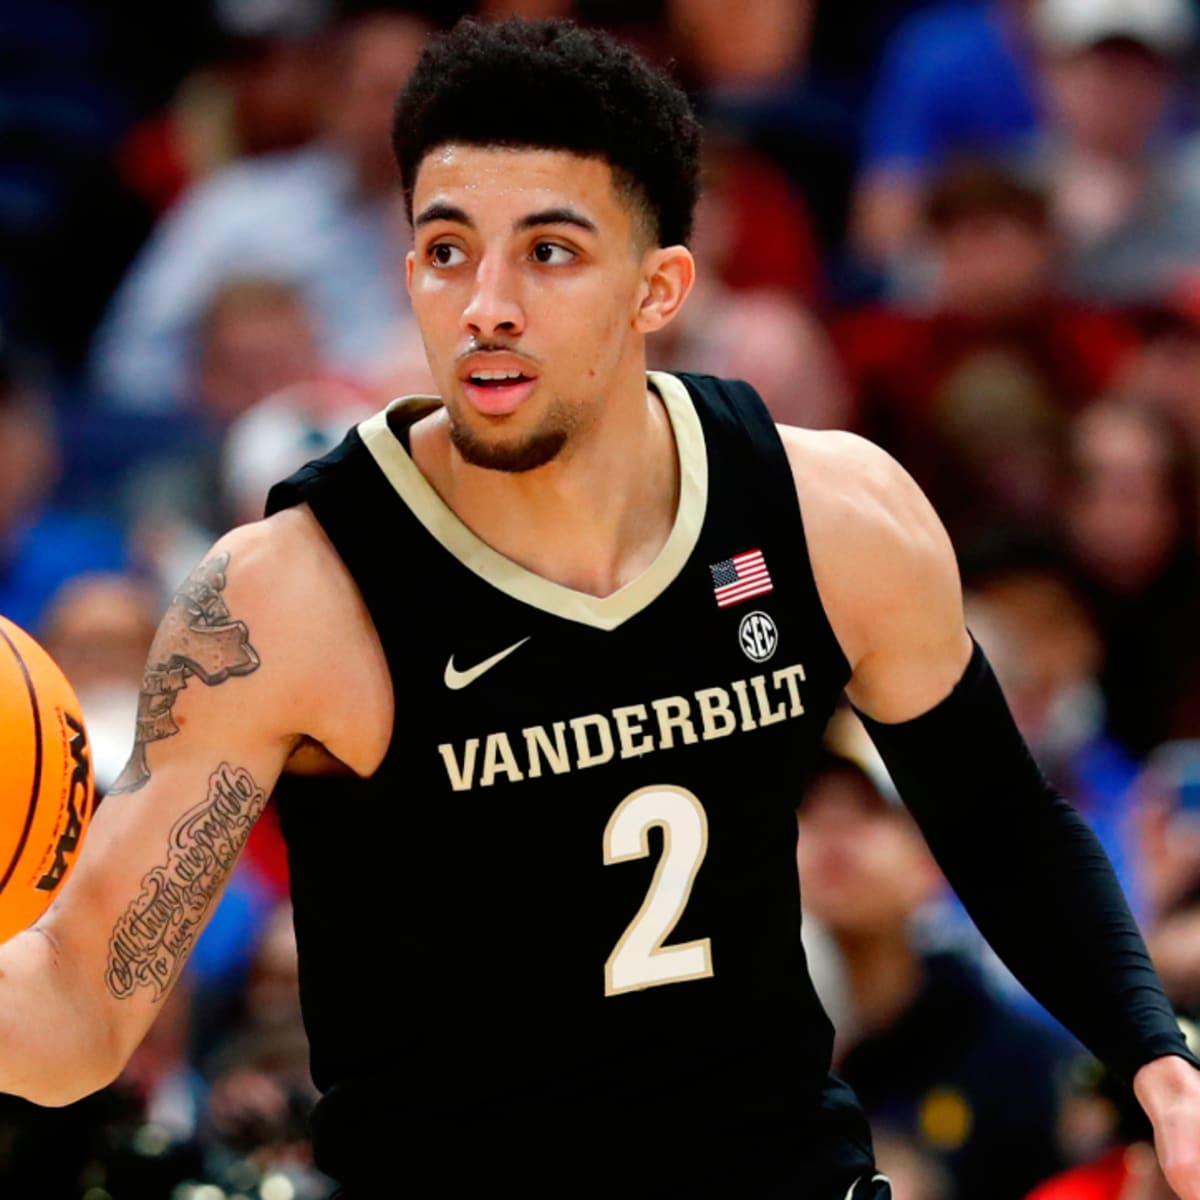 Scotty Pippen Jr of Vanderbilt basketball signs with Lakers: Report